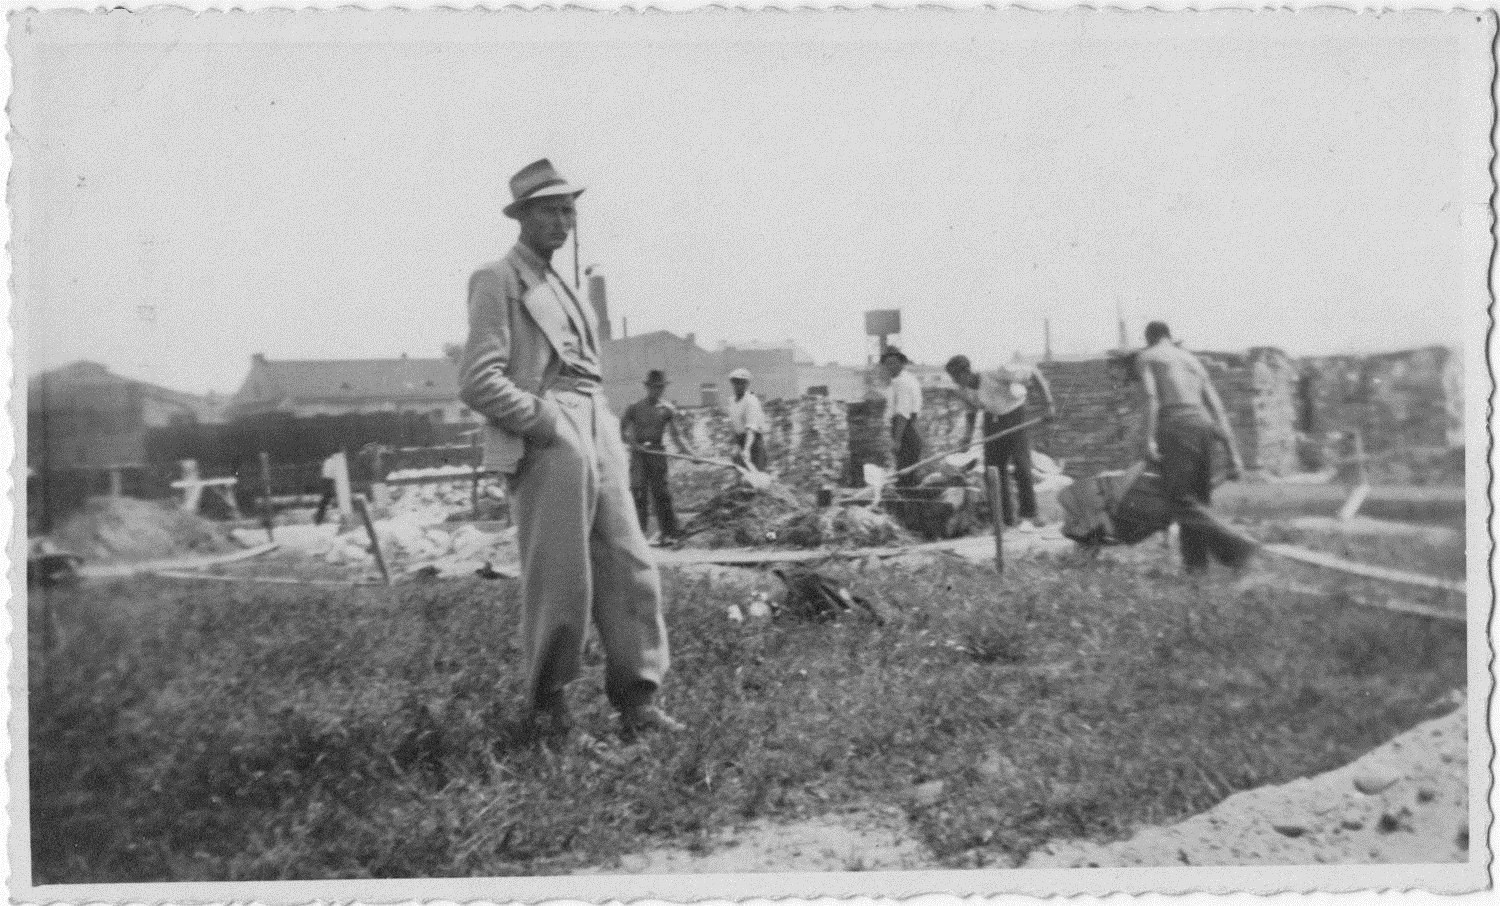 Old photograph showing Jan Tomasik supervising work on a building site in prewar Poland